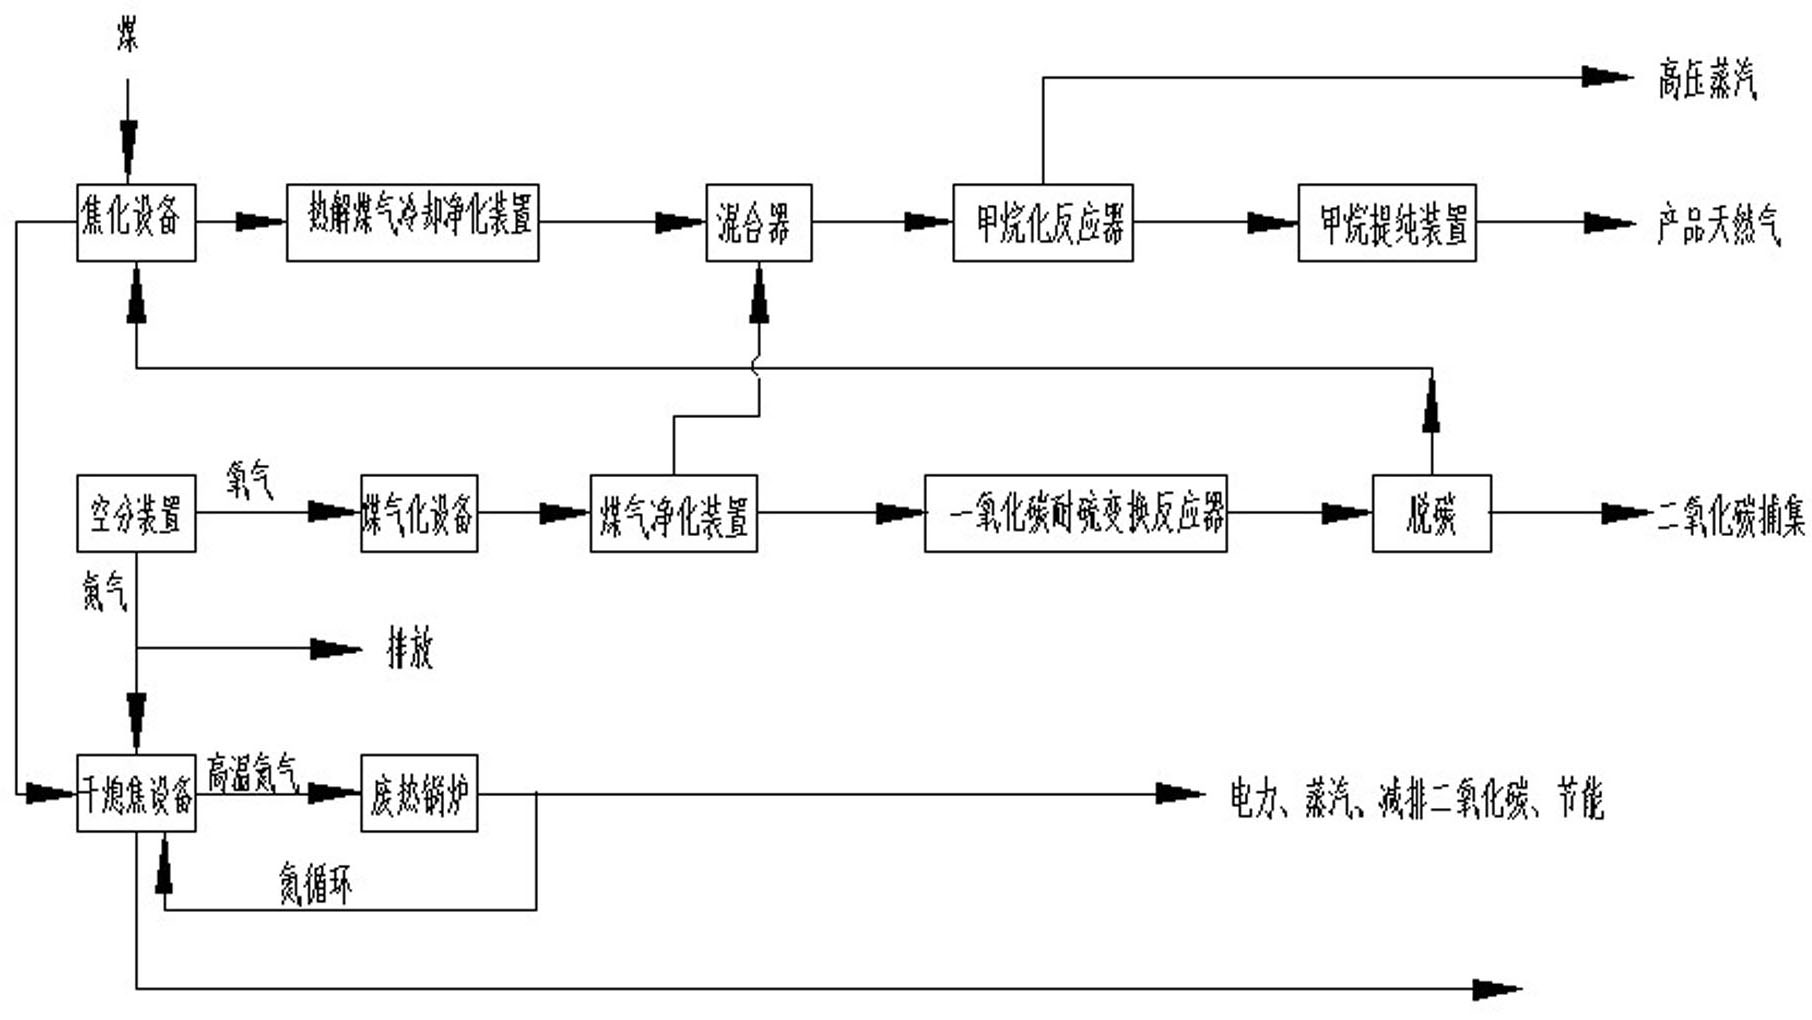 Process for producing natural gas by coal coking and pyrolysis coal gas thereof